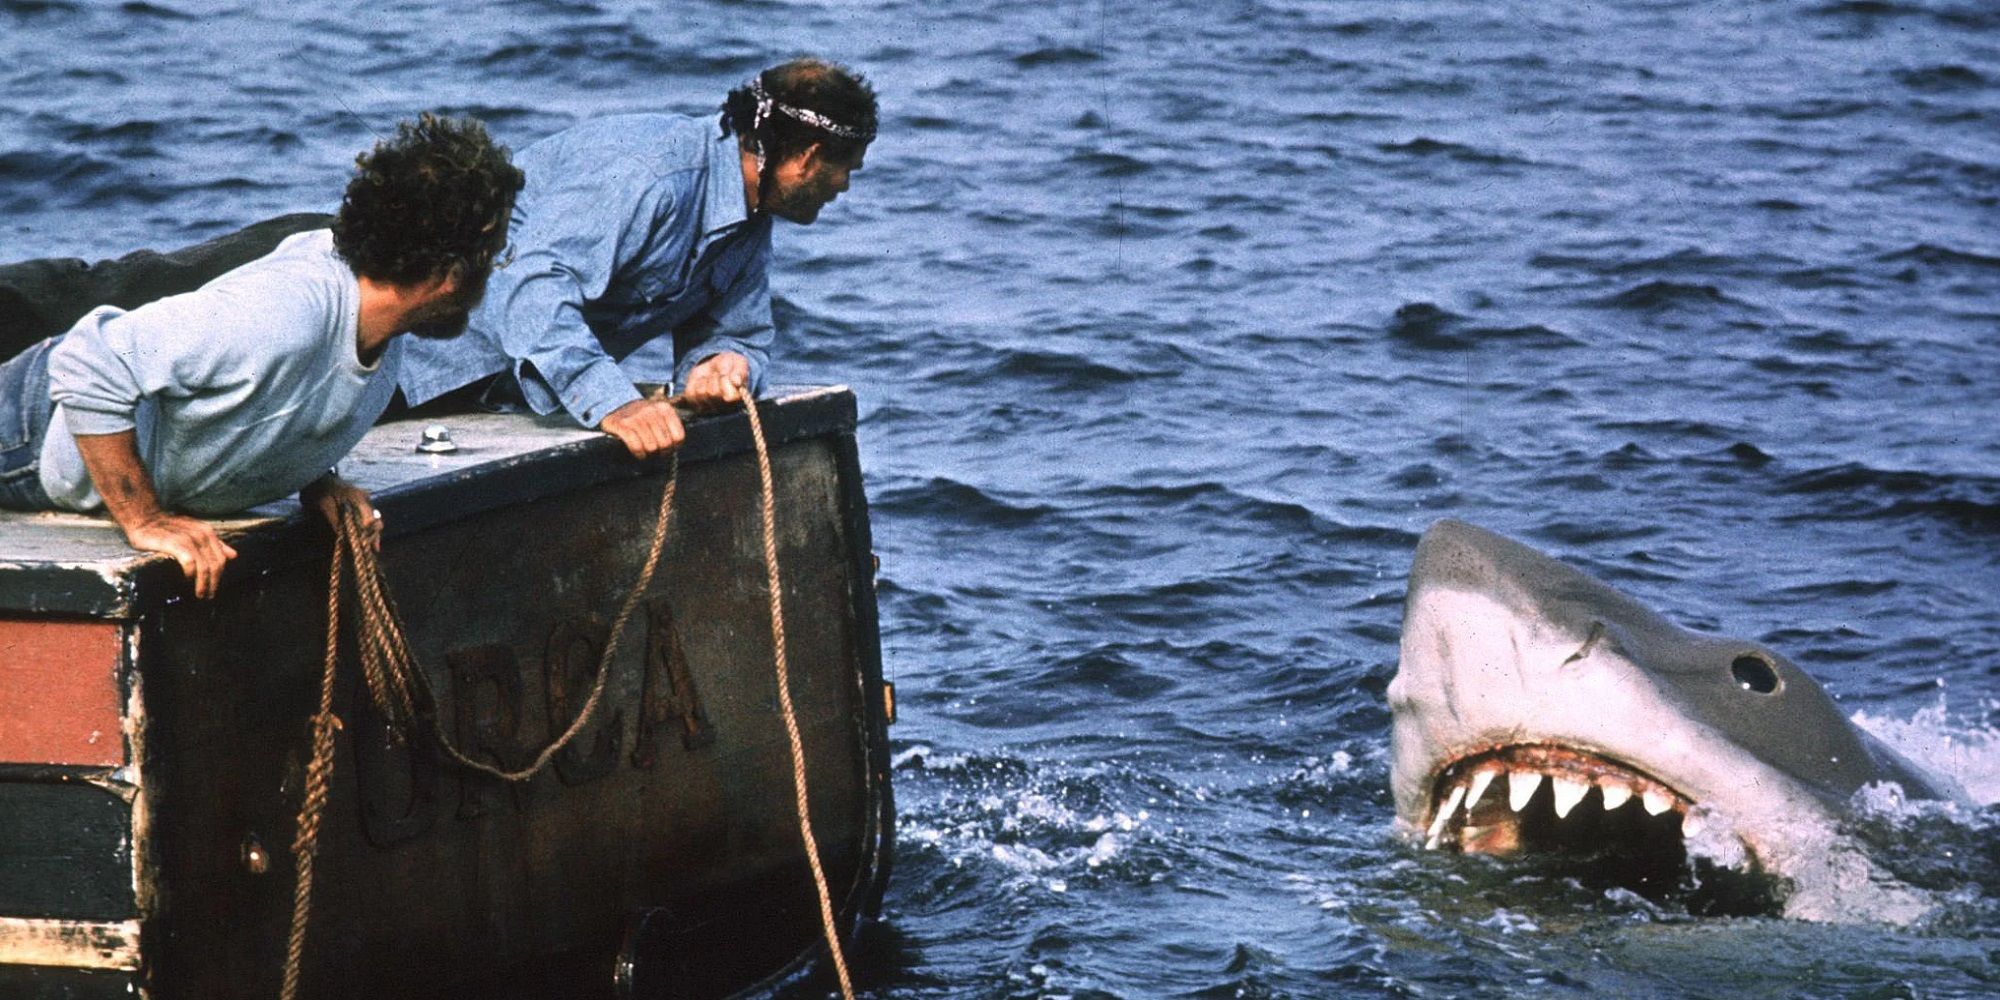 Jaws - two men looking at a shark in the ocean